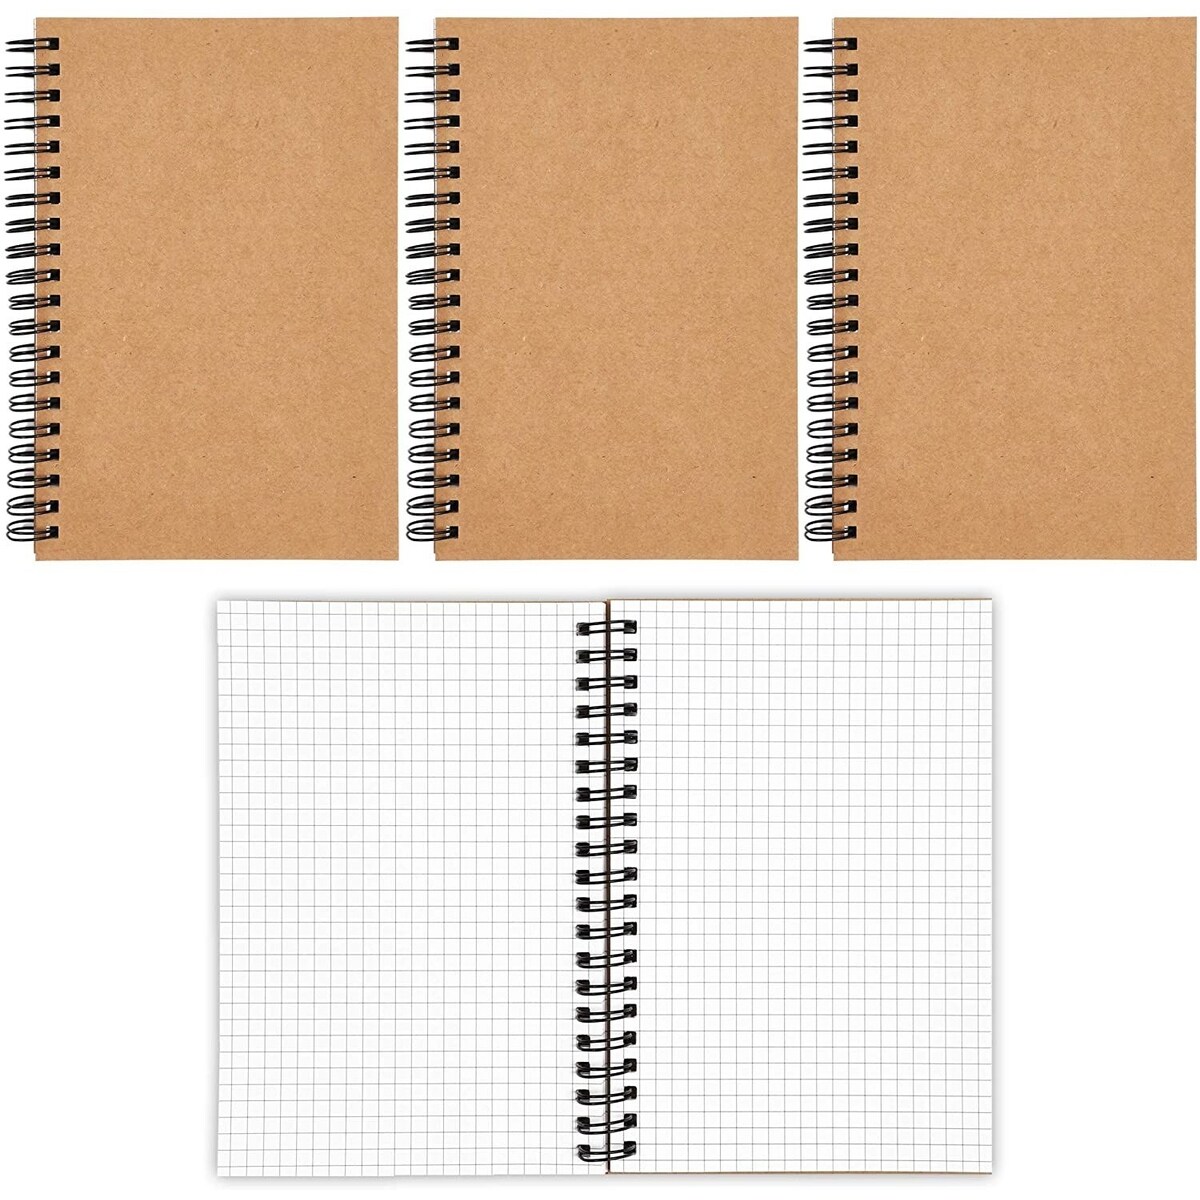 Spiral Bound Graph Paper Notebooks, 50 sheets A5 Journal (5 x 7 In, 4 Pack) Brown